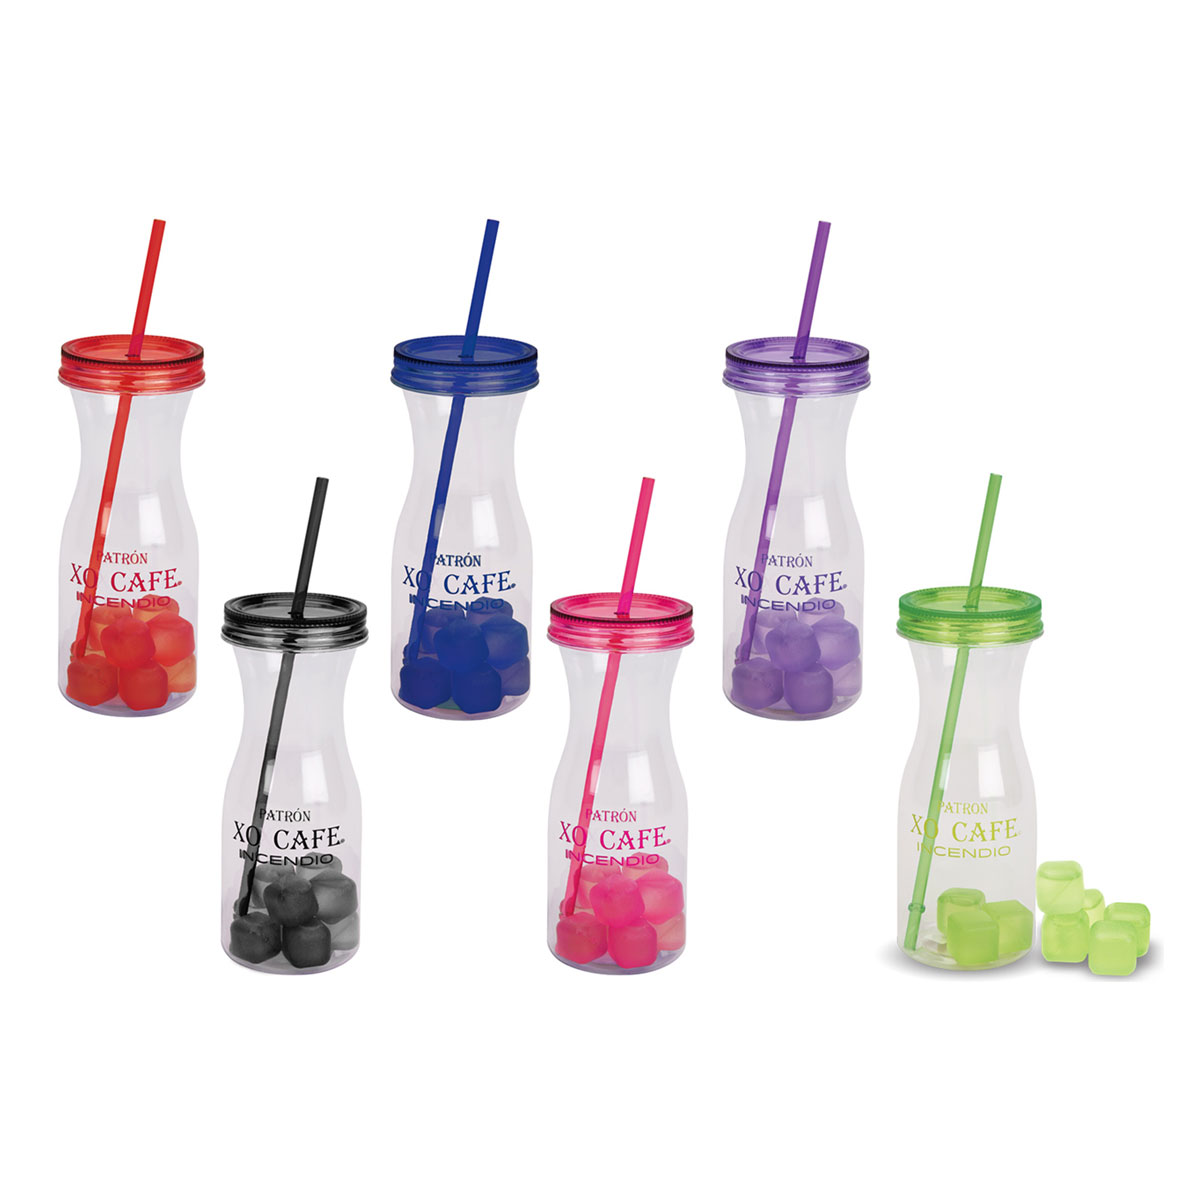 30 OZ. CARAFE STYLE WATER BOTTLE WITH MATCHING ICE STRAW AND ICE CUBES